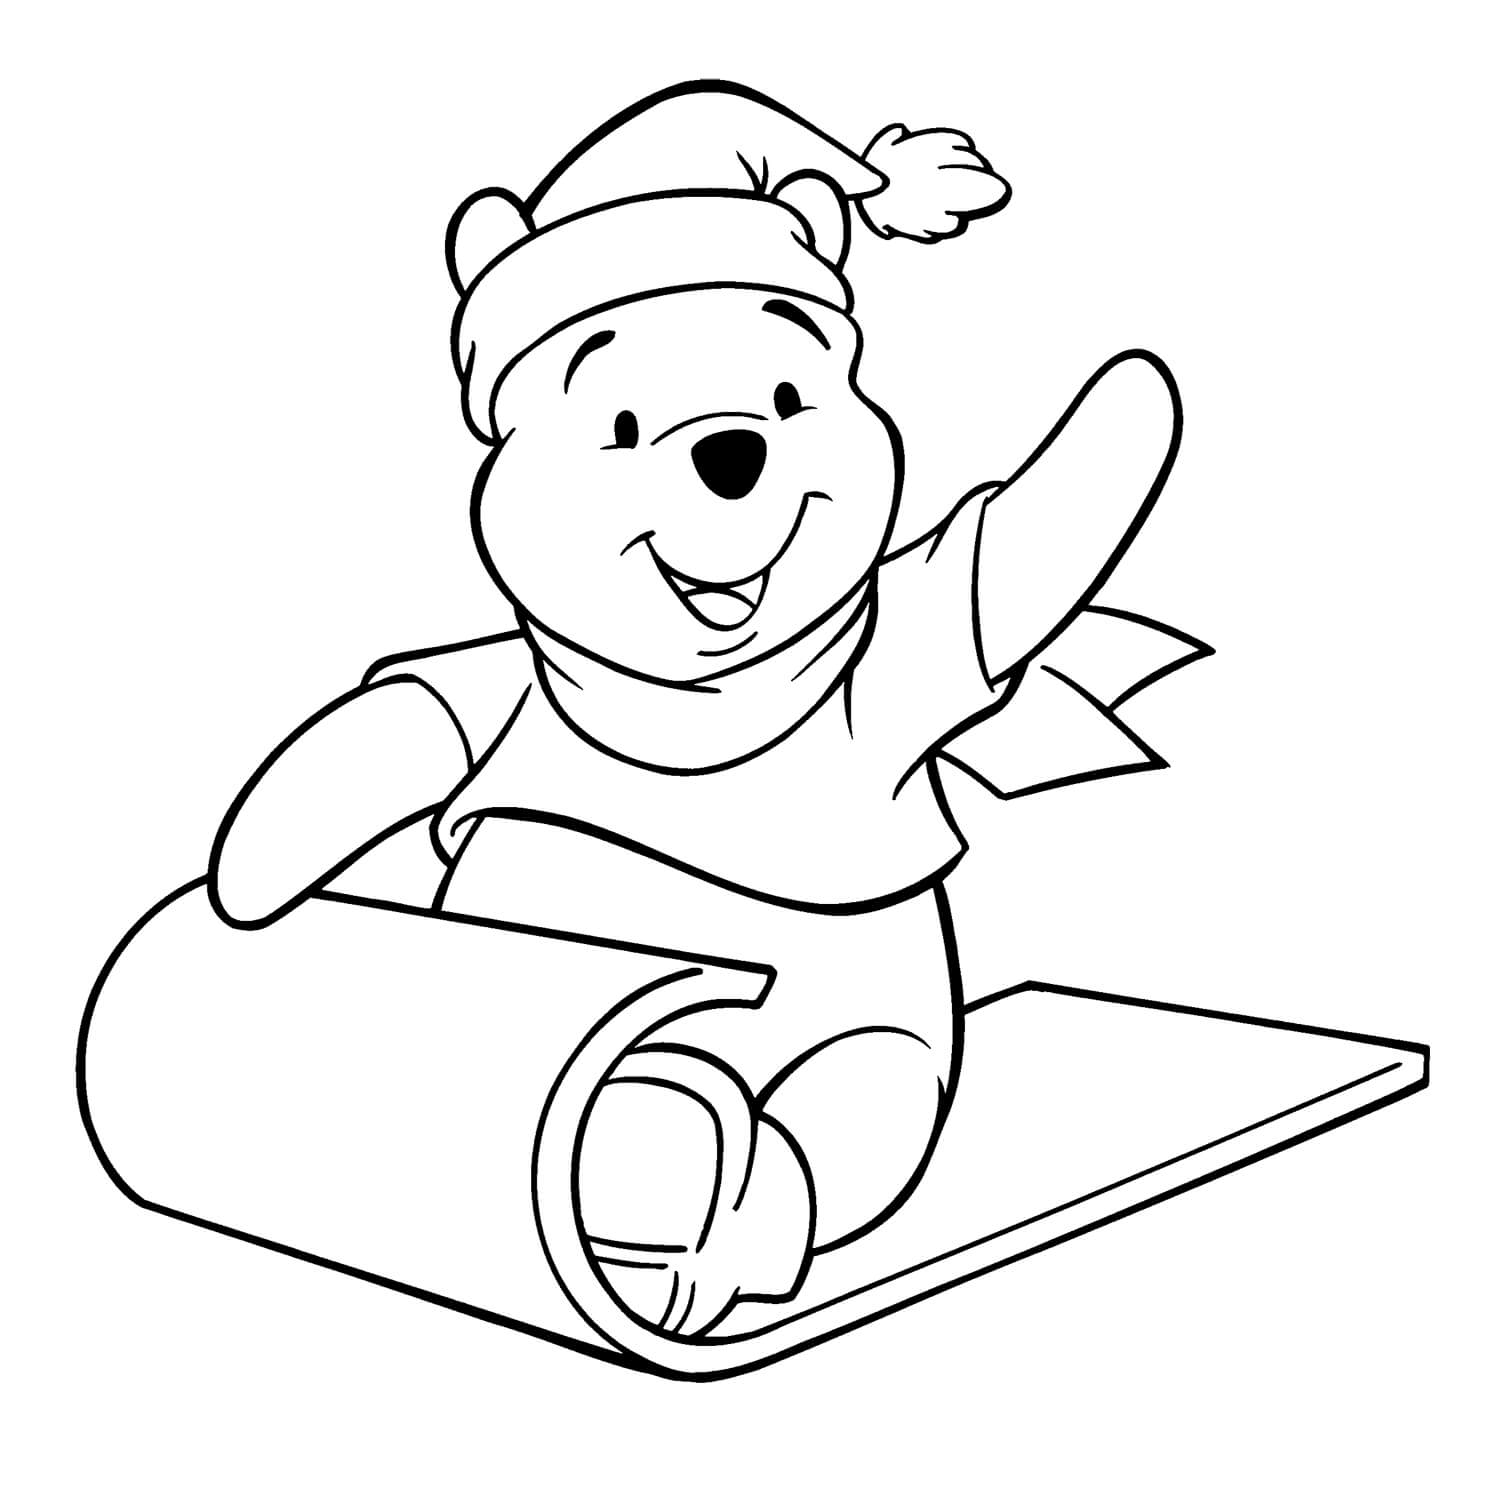 Christmas Sledding Winnie the Pooh Coloring Pages